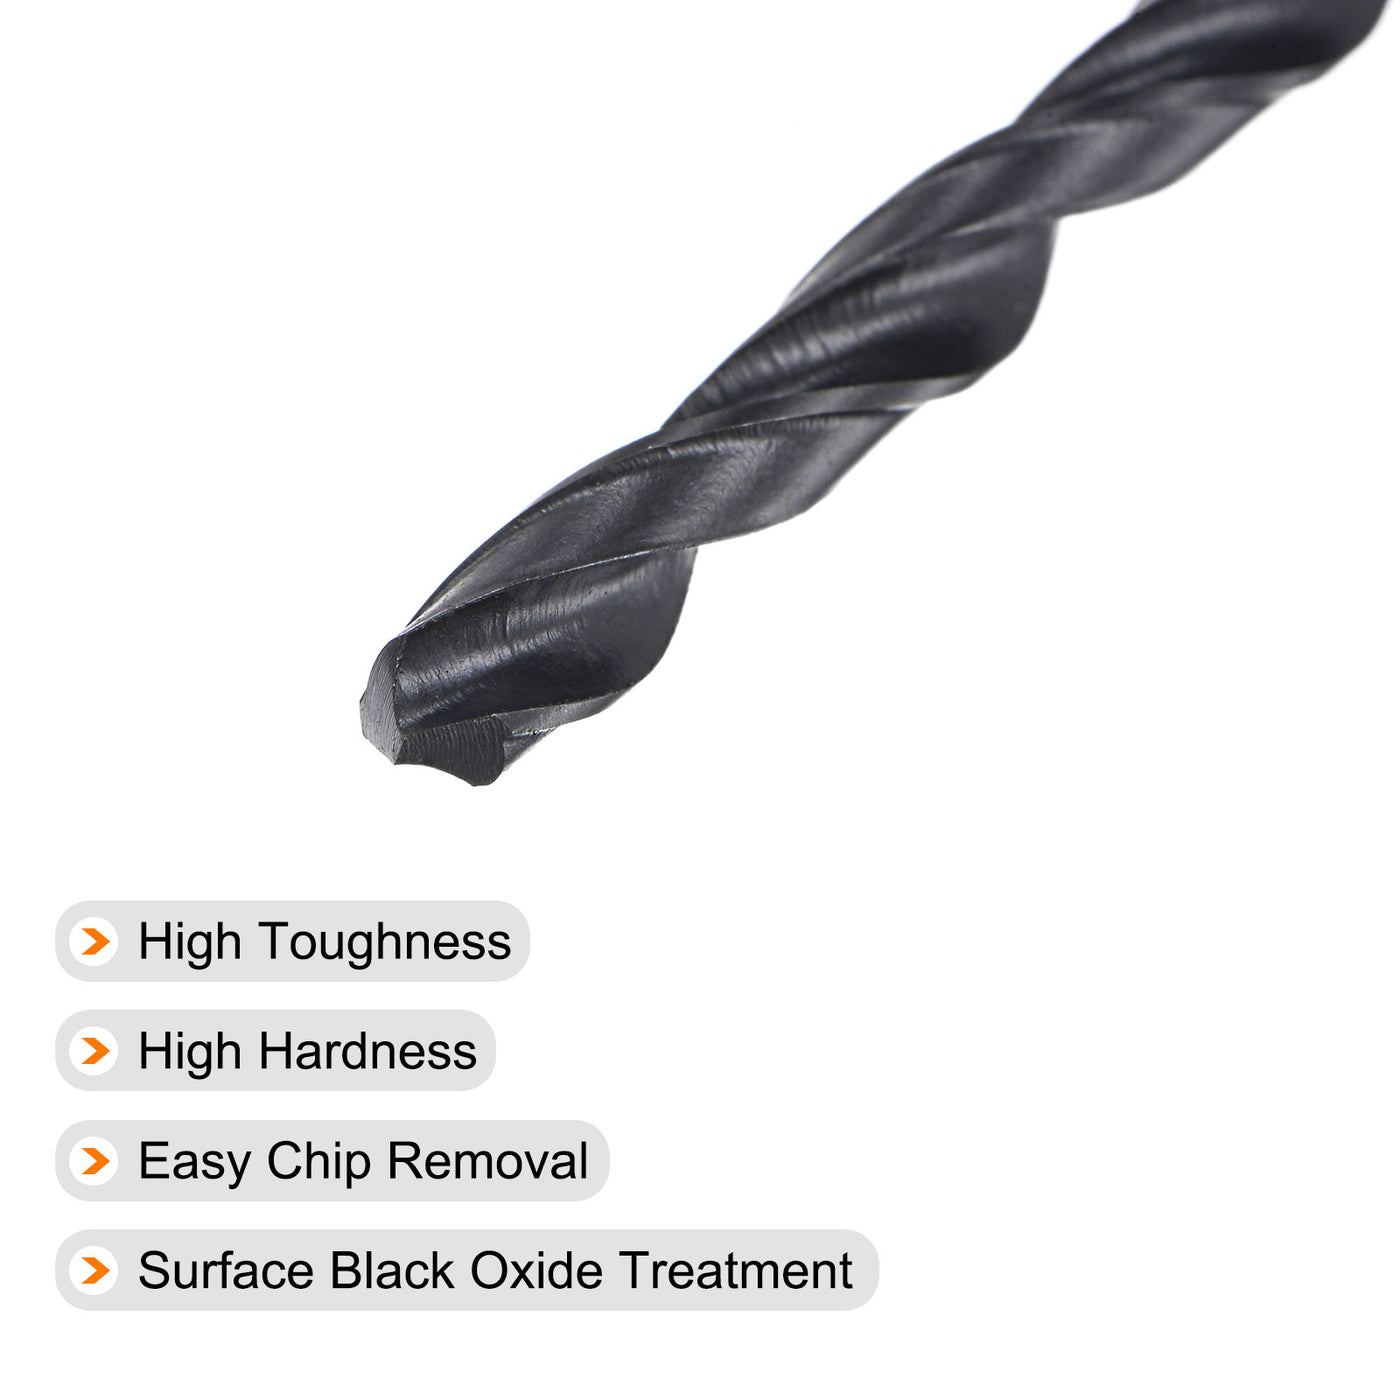 uxcell Uxcell High Speed Steel Twist Drill Bit, 5.1mm Fully Ground Black Oxide 85mm Long 5Pcs